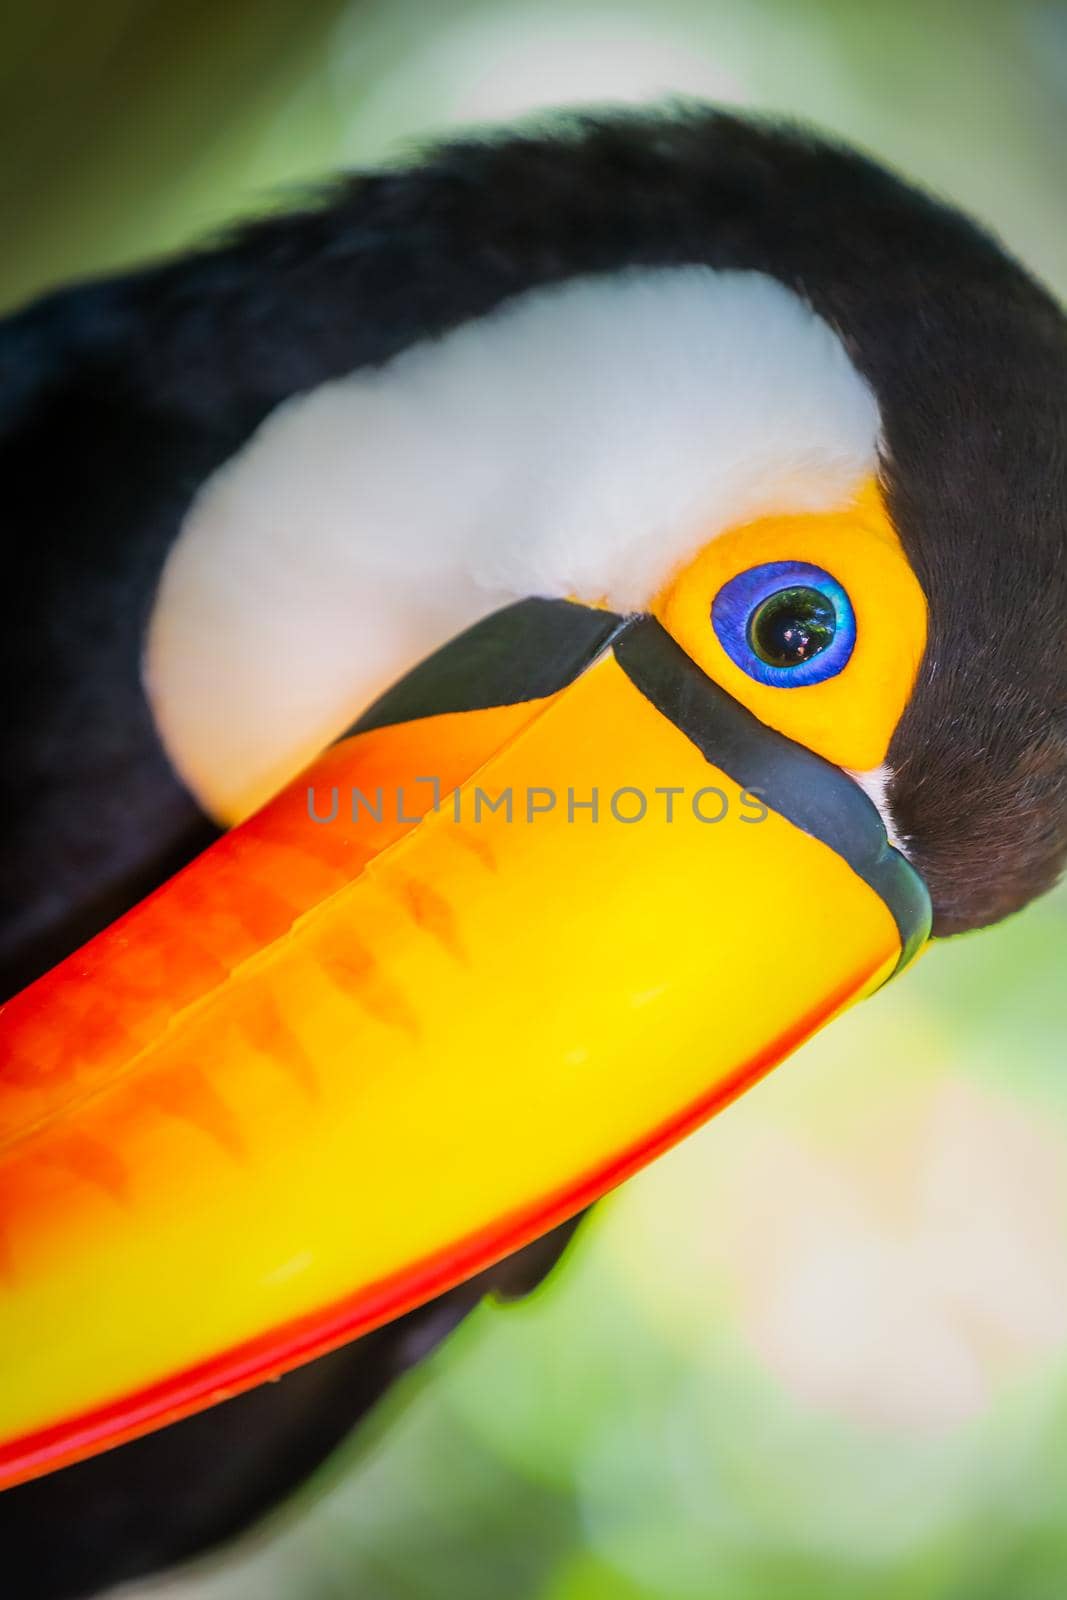 Colorful Toco Toucan tropical bird looking at camera in Pantanal, Brazil